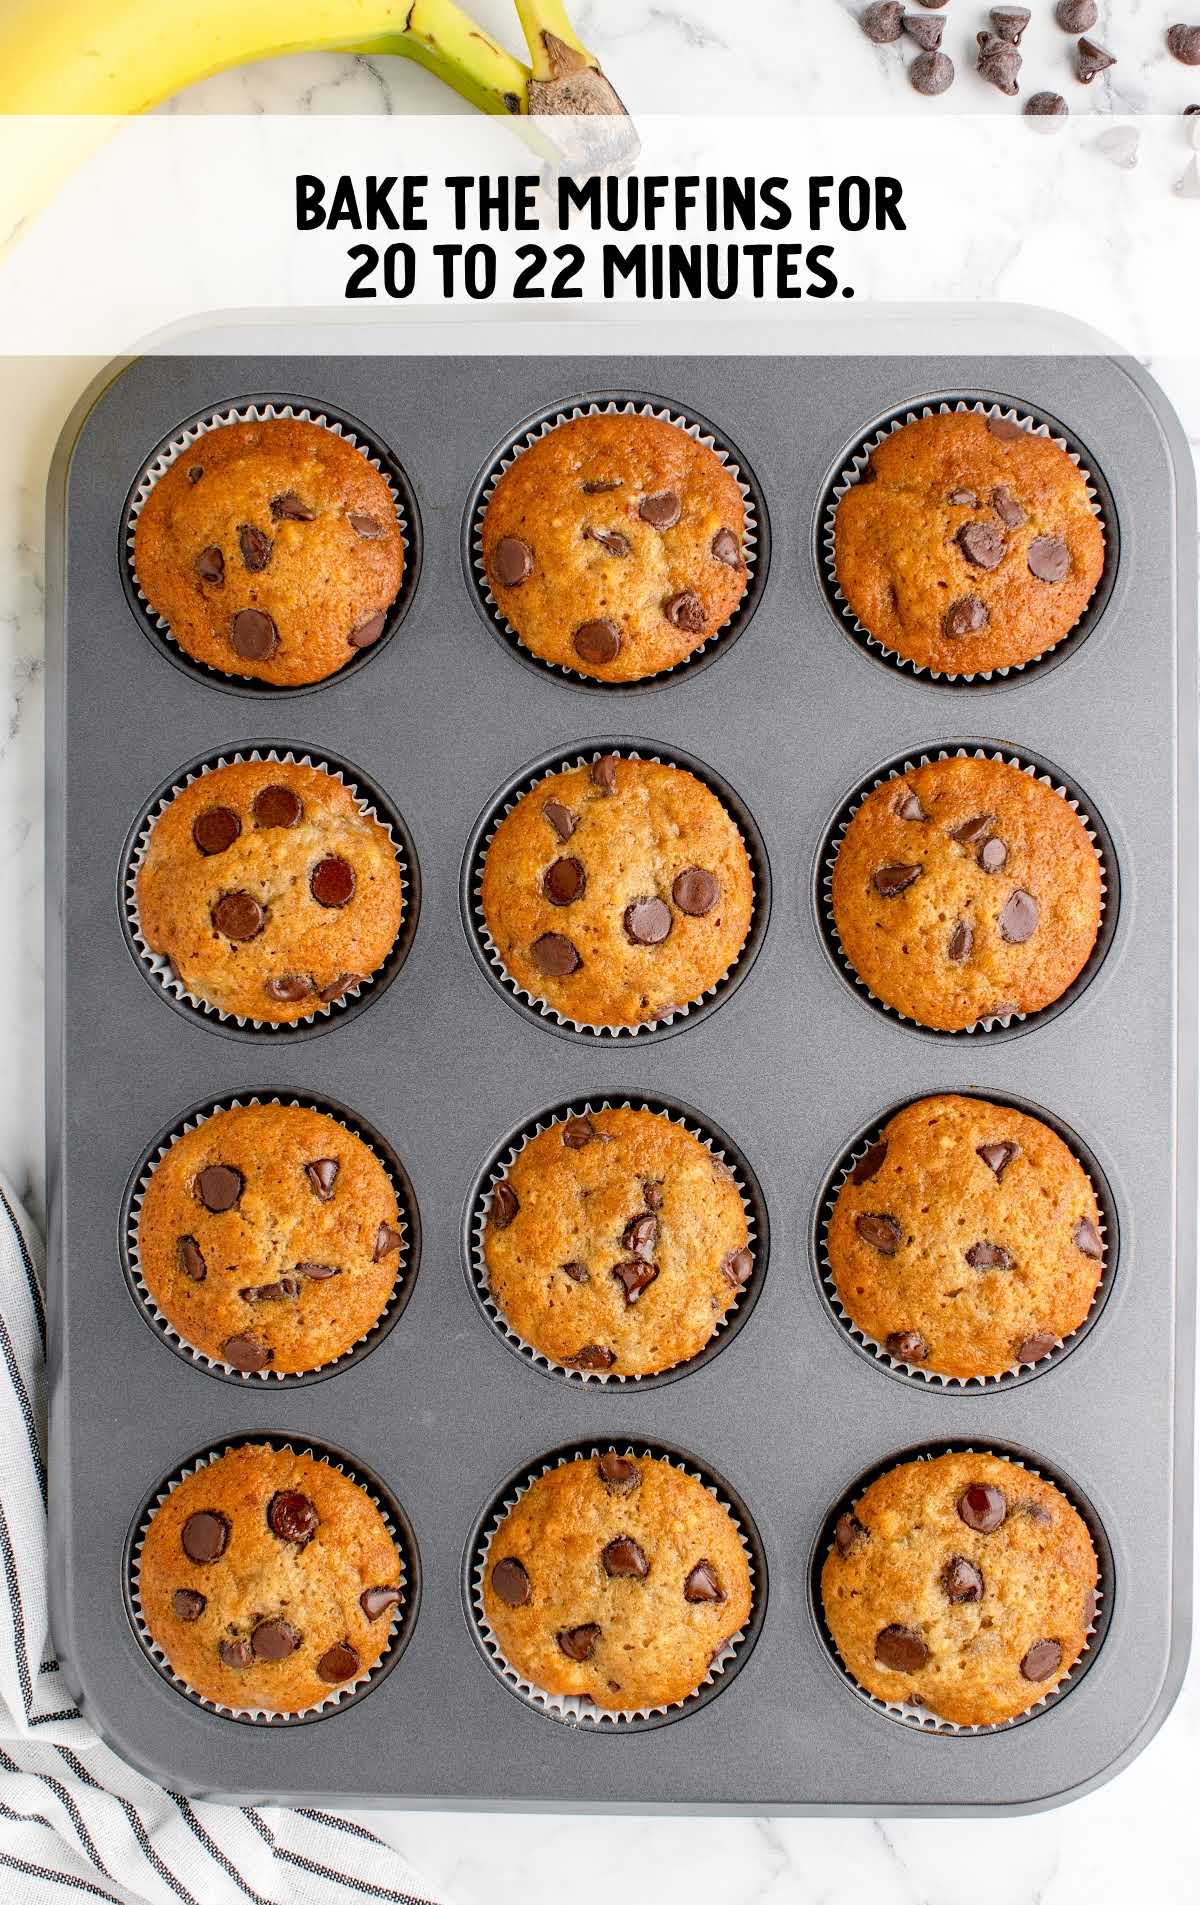 Muffins baked in a muffin pan